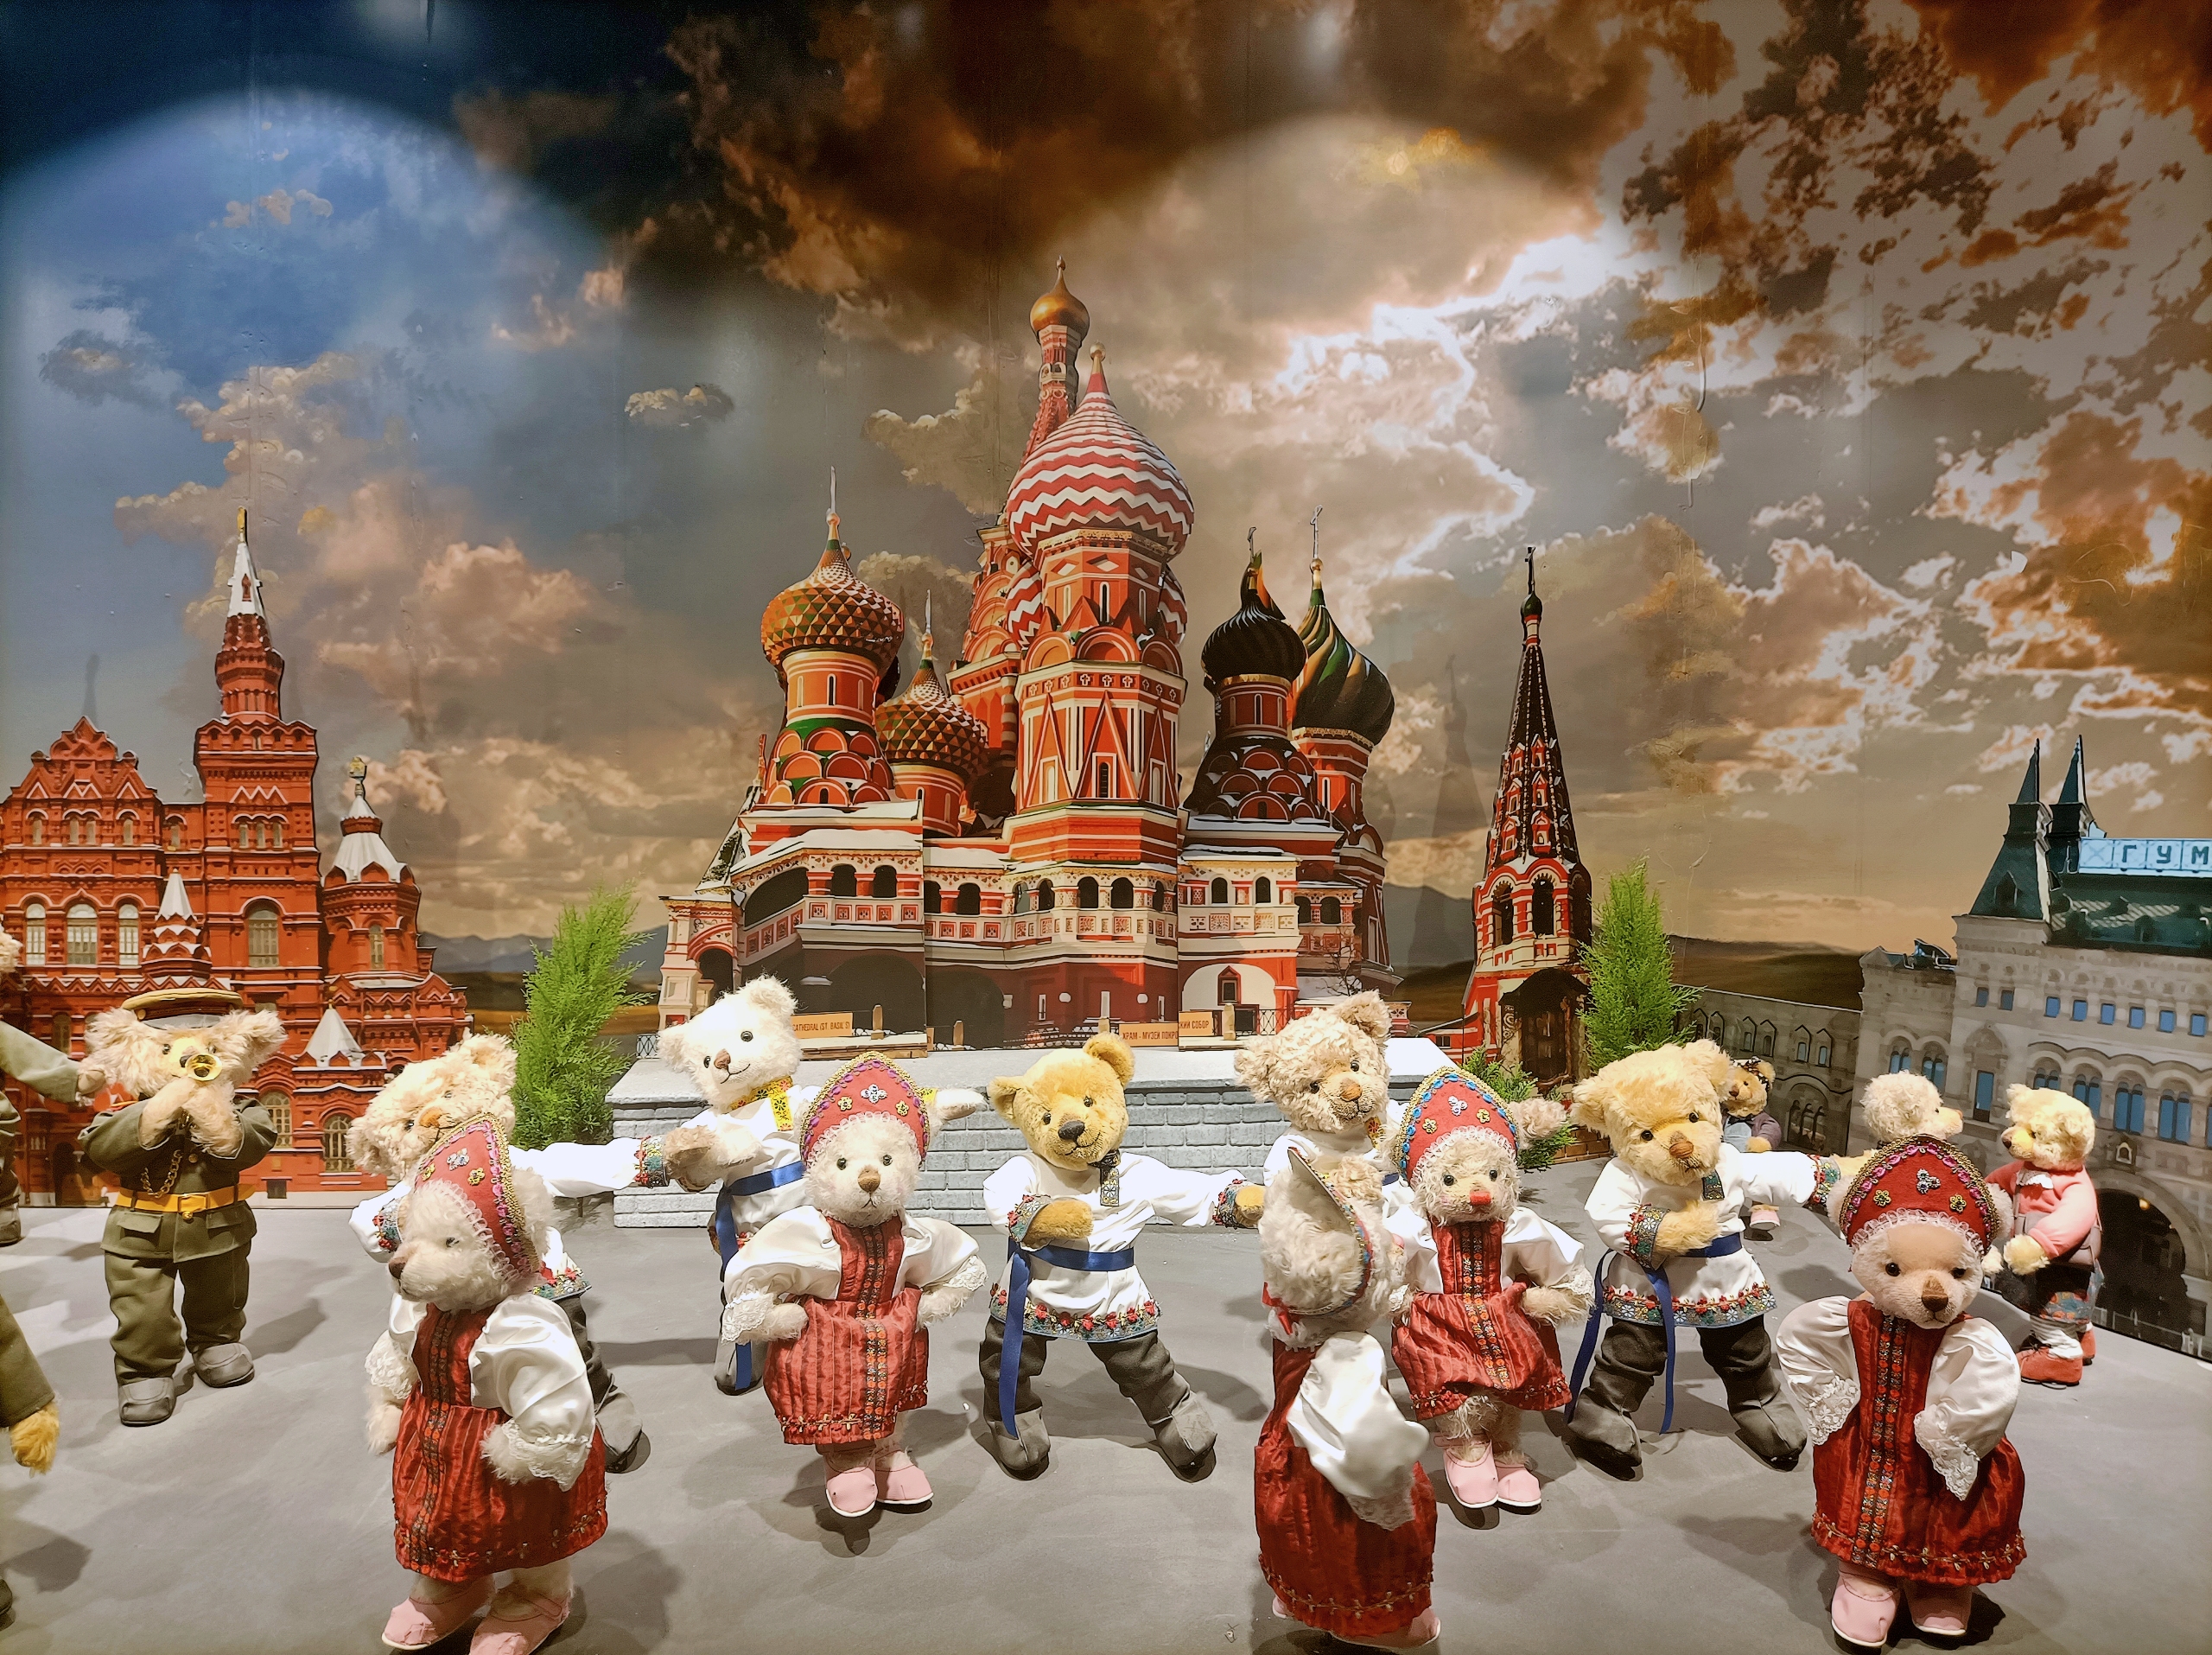 A view of the Teddy Bear Museum on March 1, 2022 in Haikou, China. News  Photo - Getty Images